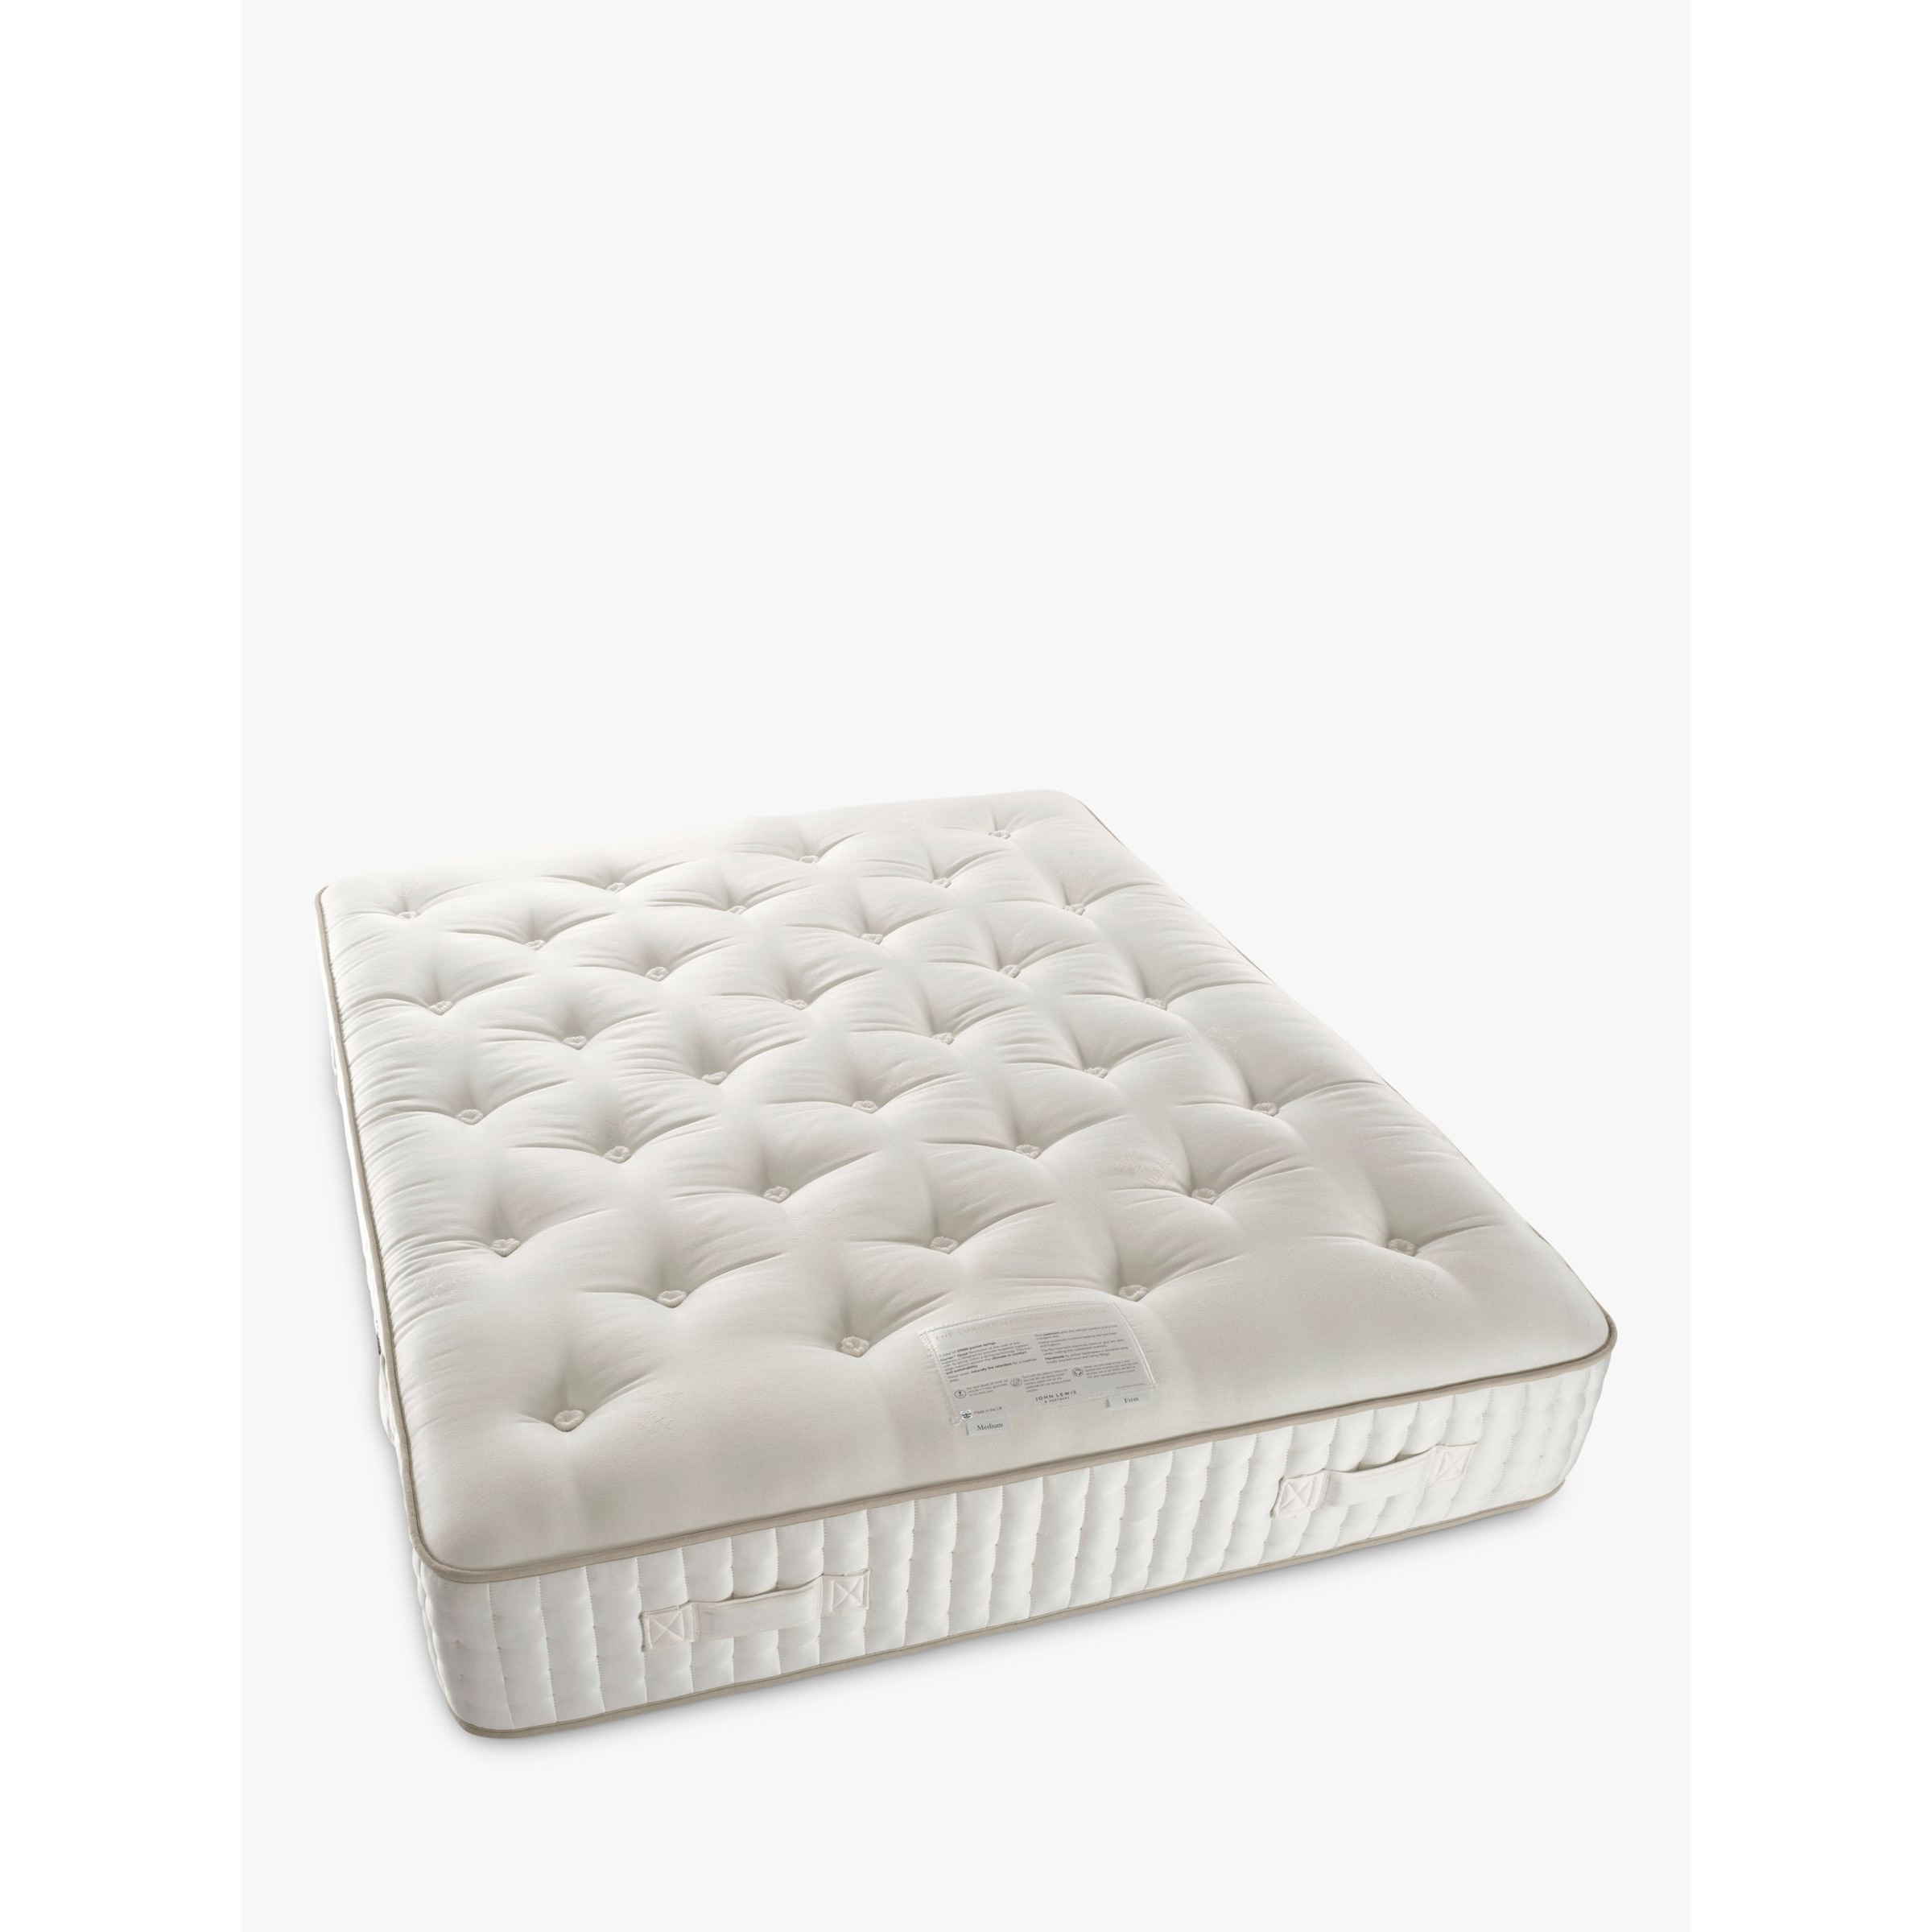 John Lewis Luxury Natural Collection Cashmere 27000, Small Double, Firmer Tension Pocket Spring Mattress - image 1